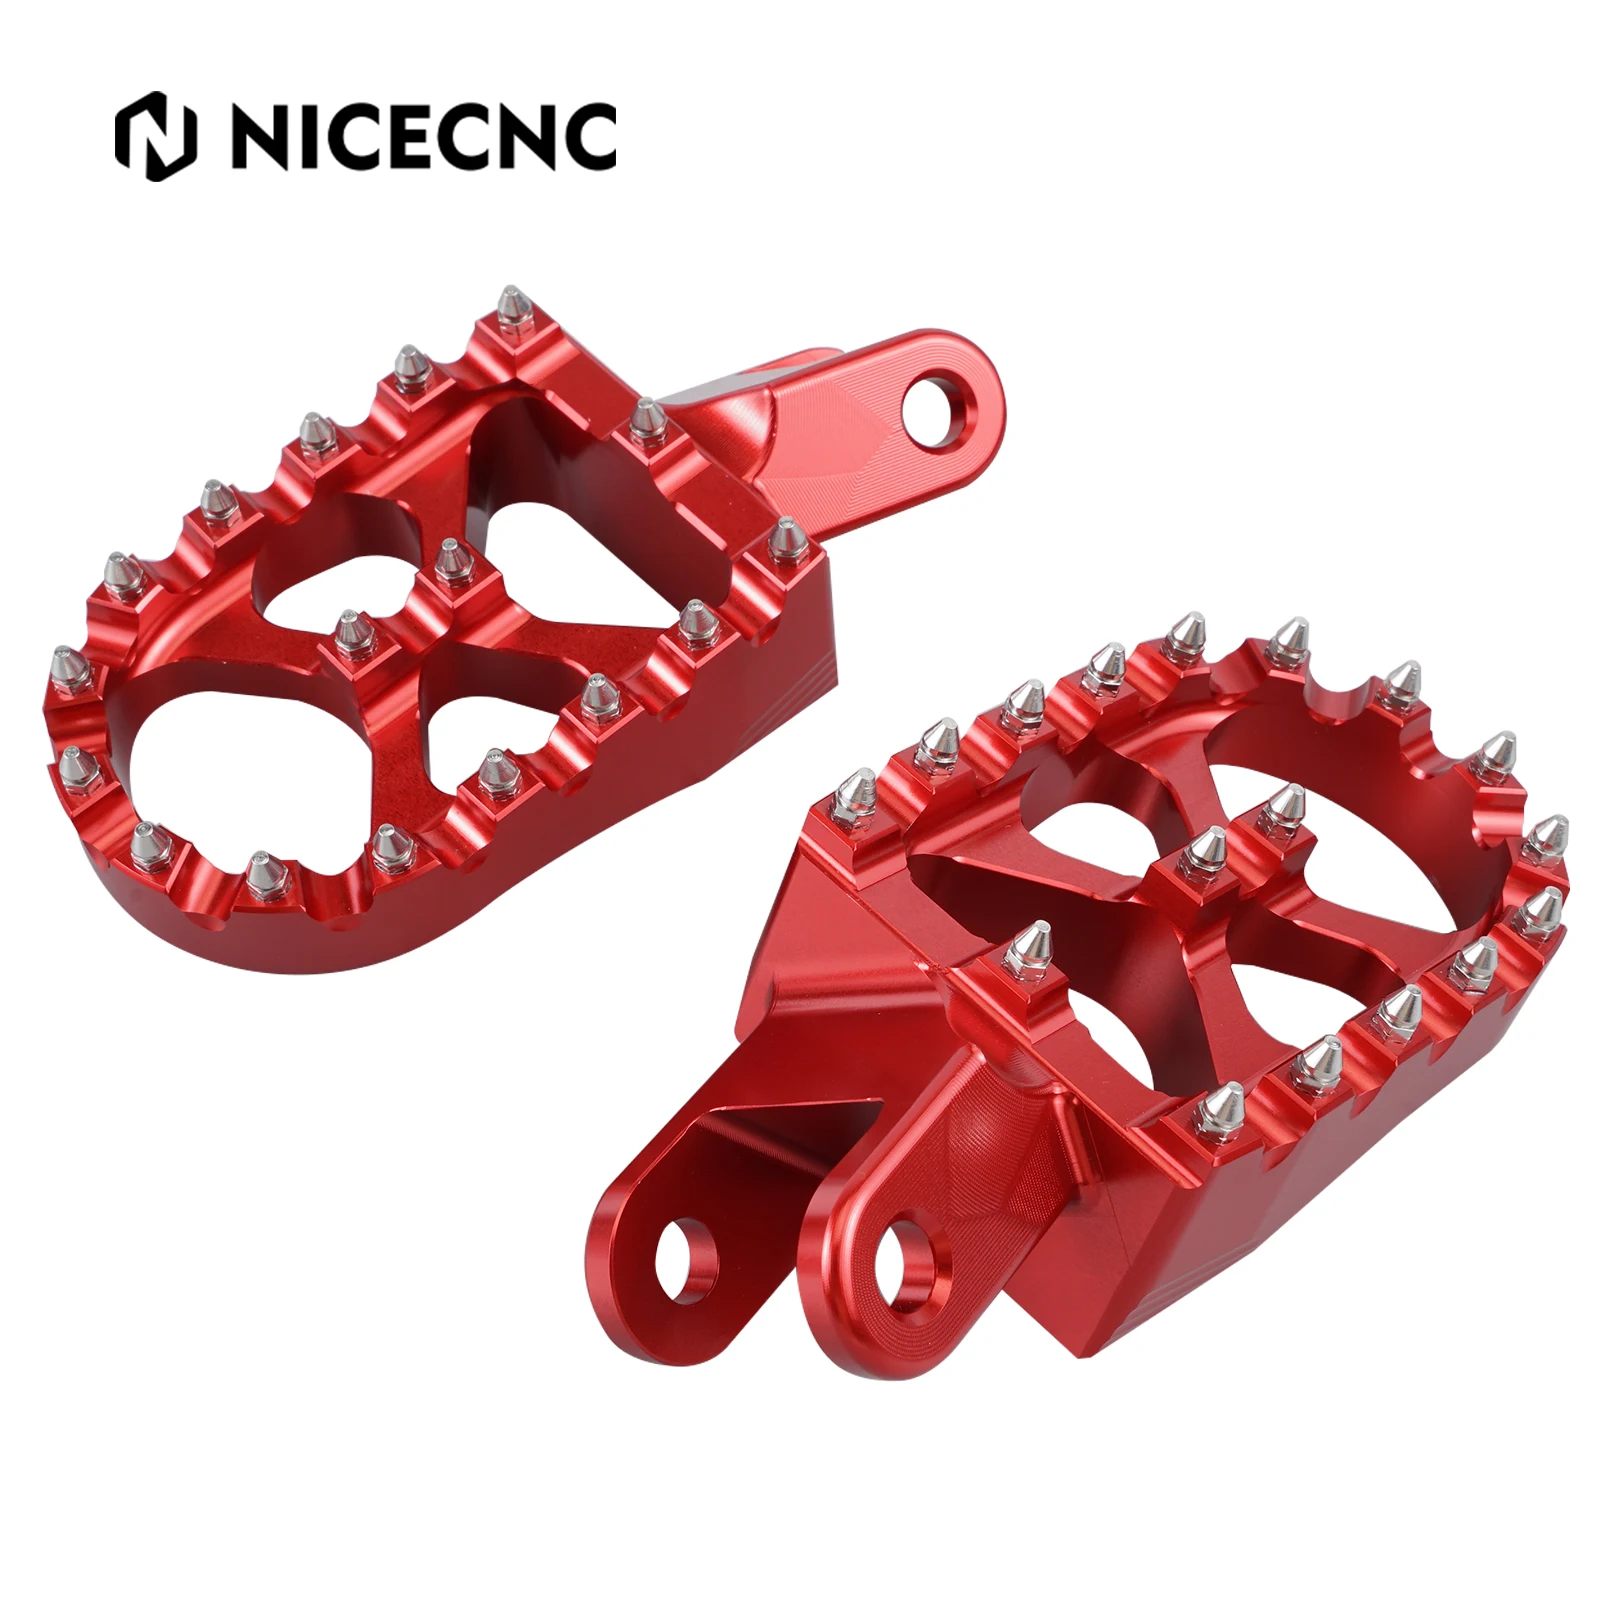 Nice Cnc XR650L 93-23 Xr 250R 400R 600R 650R Cr 80R 85R CR80RB CR85RB Expert Fo - £266.53 GBP